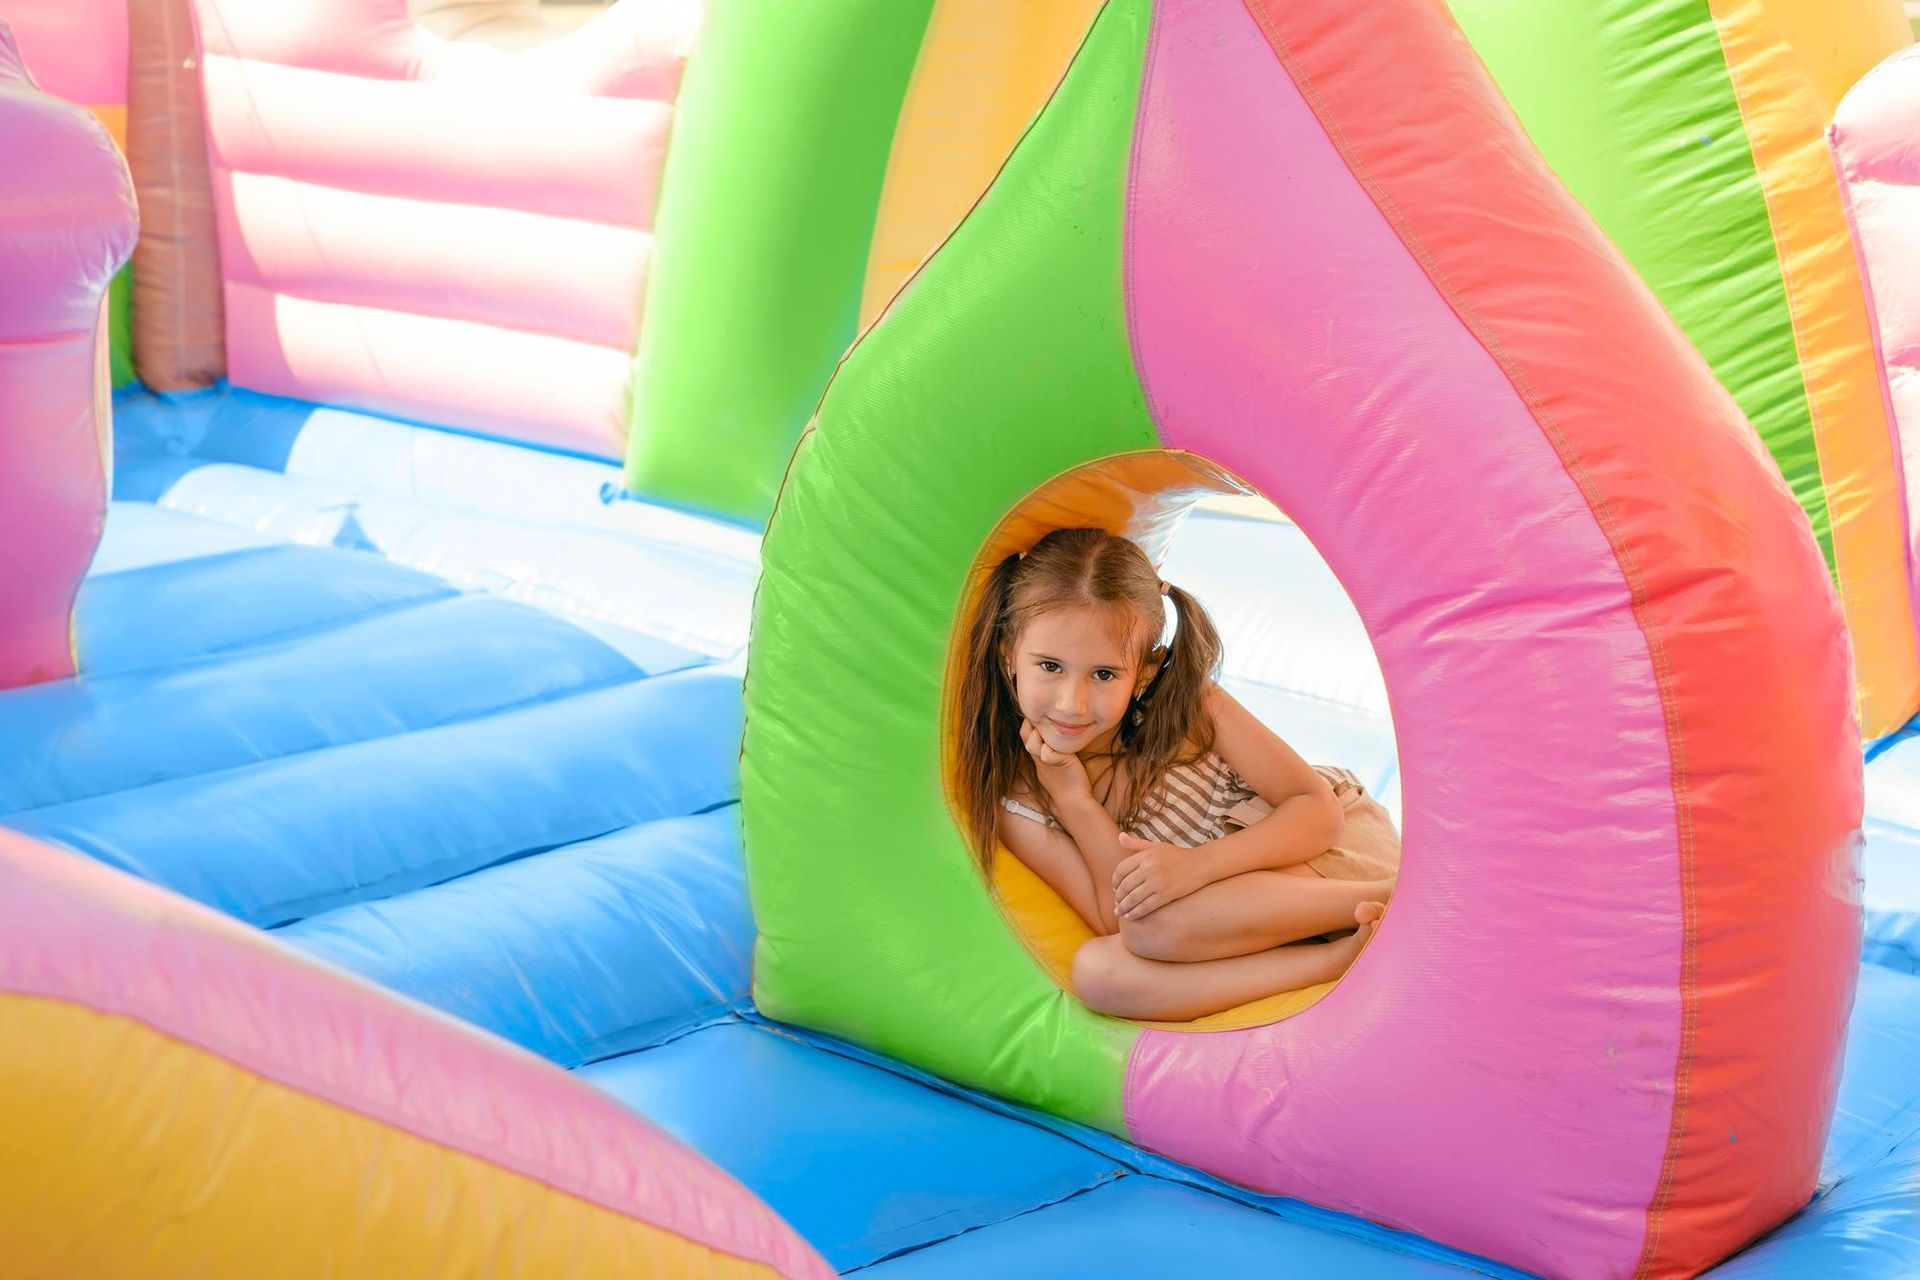 A little girl is sitting in a colorful inflatable house.